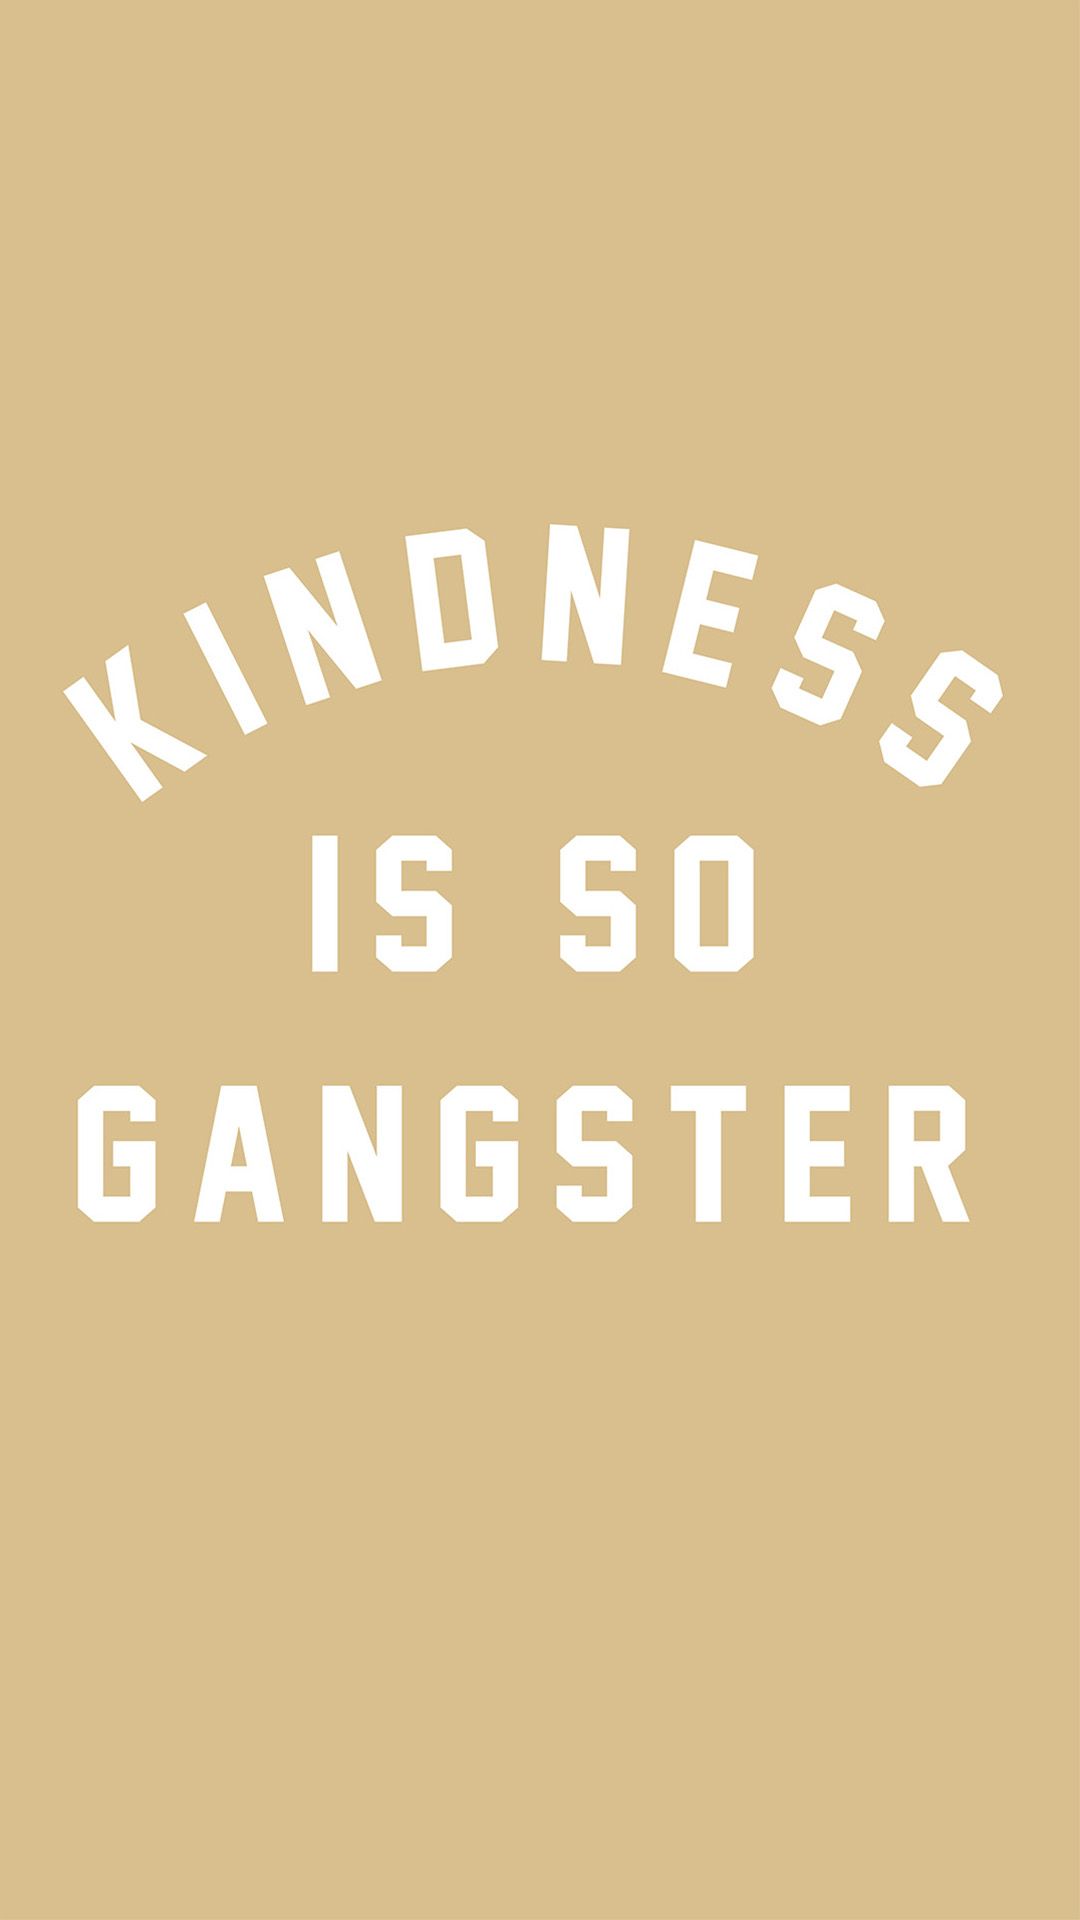 Kindness Is Gangster Background - HD Wallpaper 